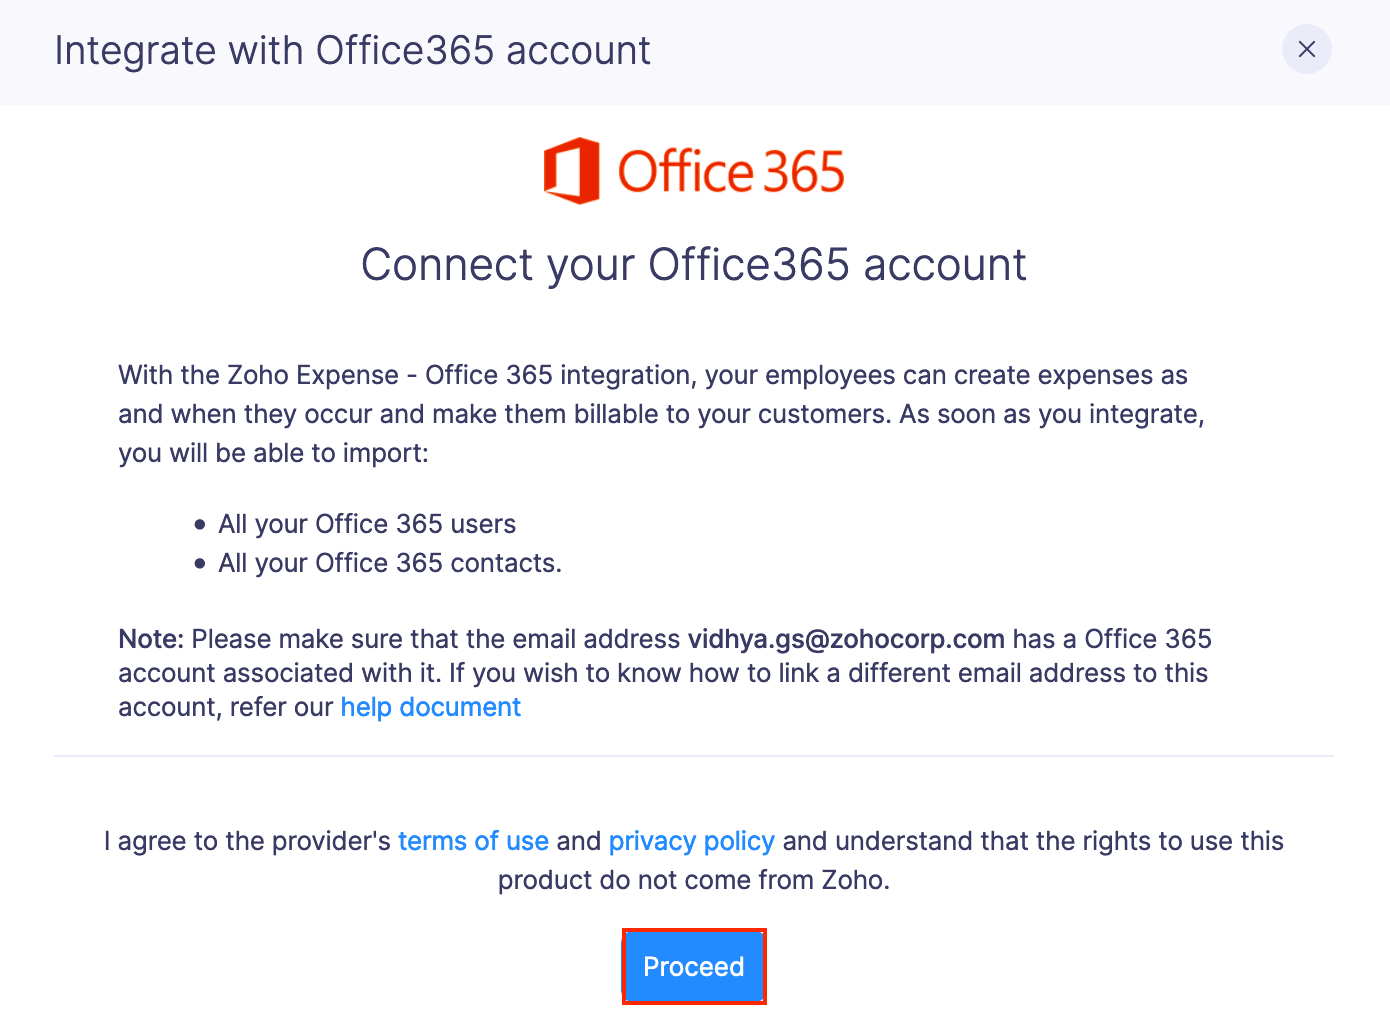 Integrate with Office 365